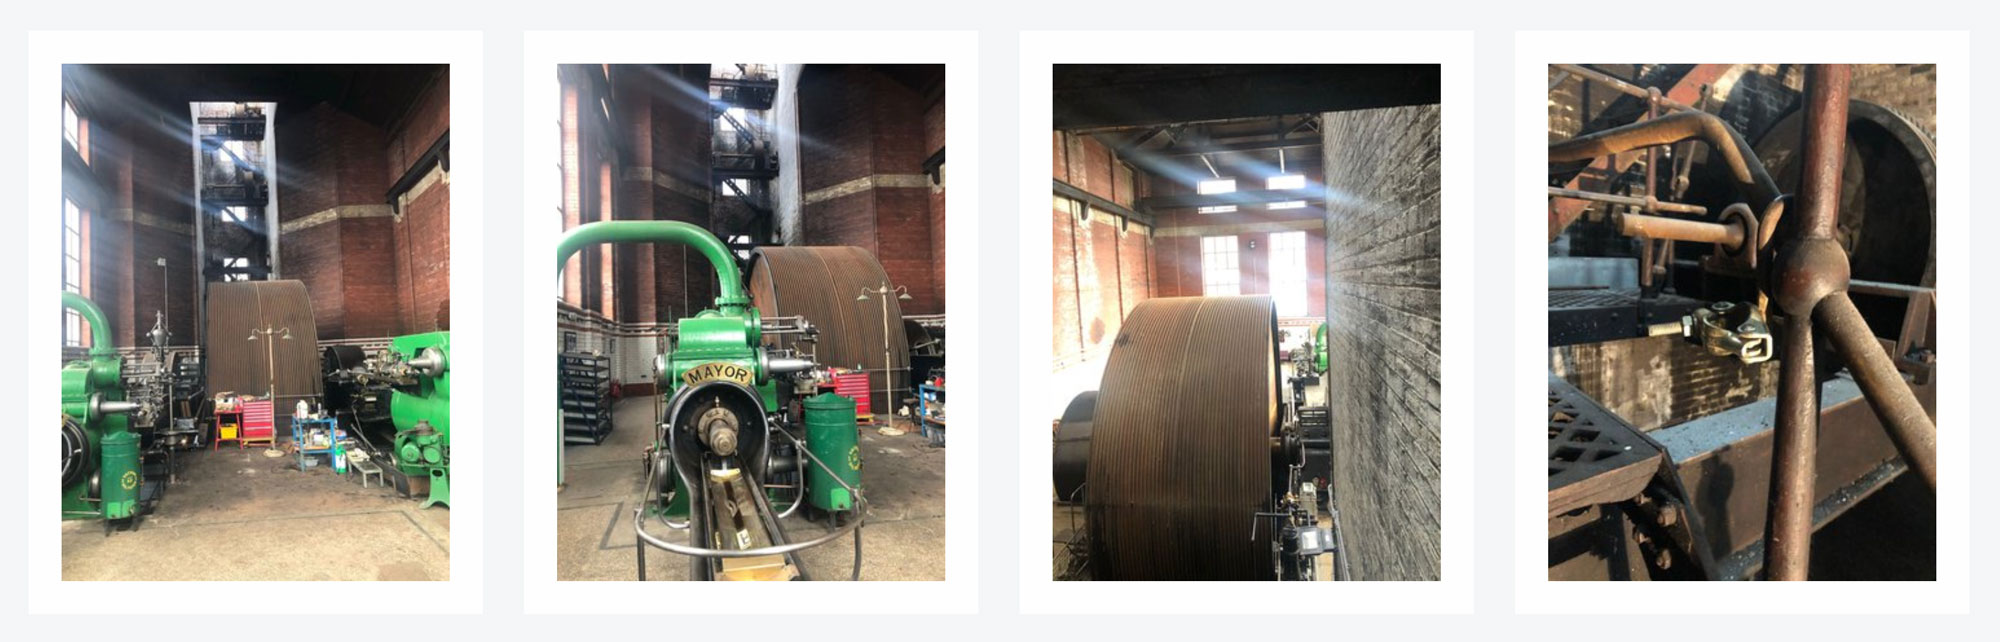 Four pictures illustrating the functioning of a steam engine machine within the premises of a factory